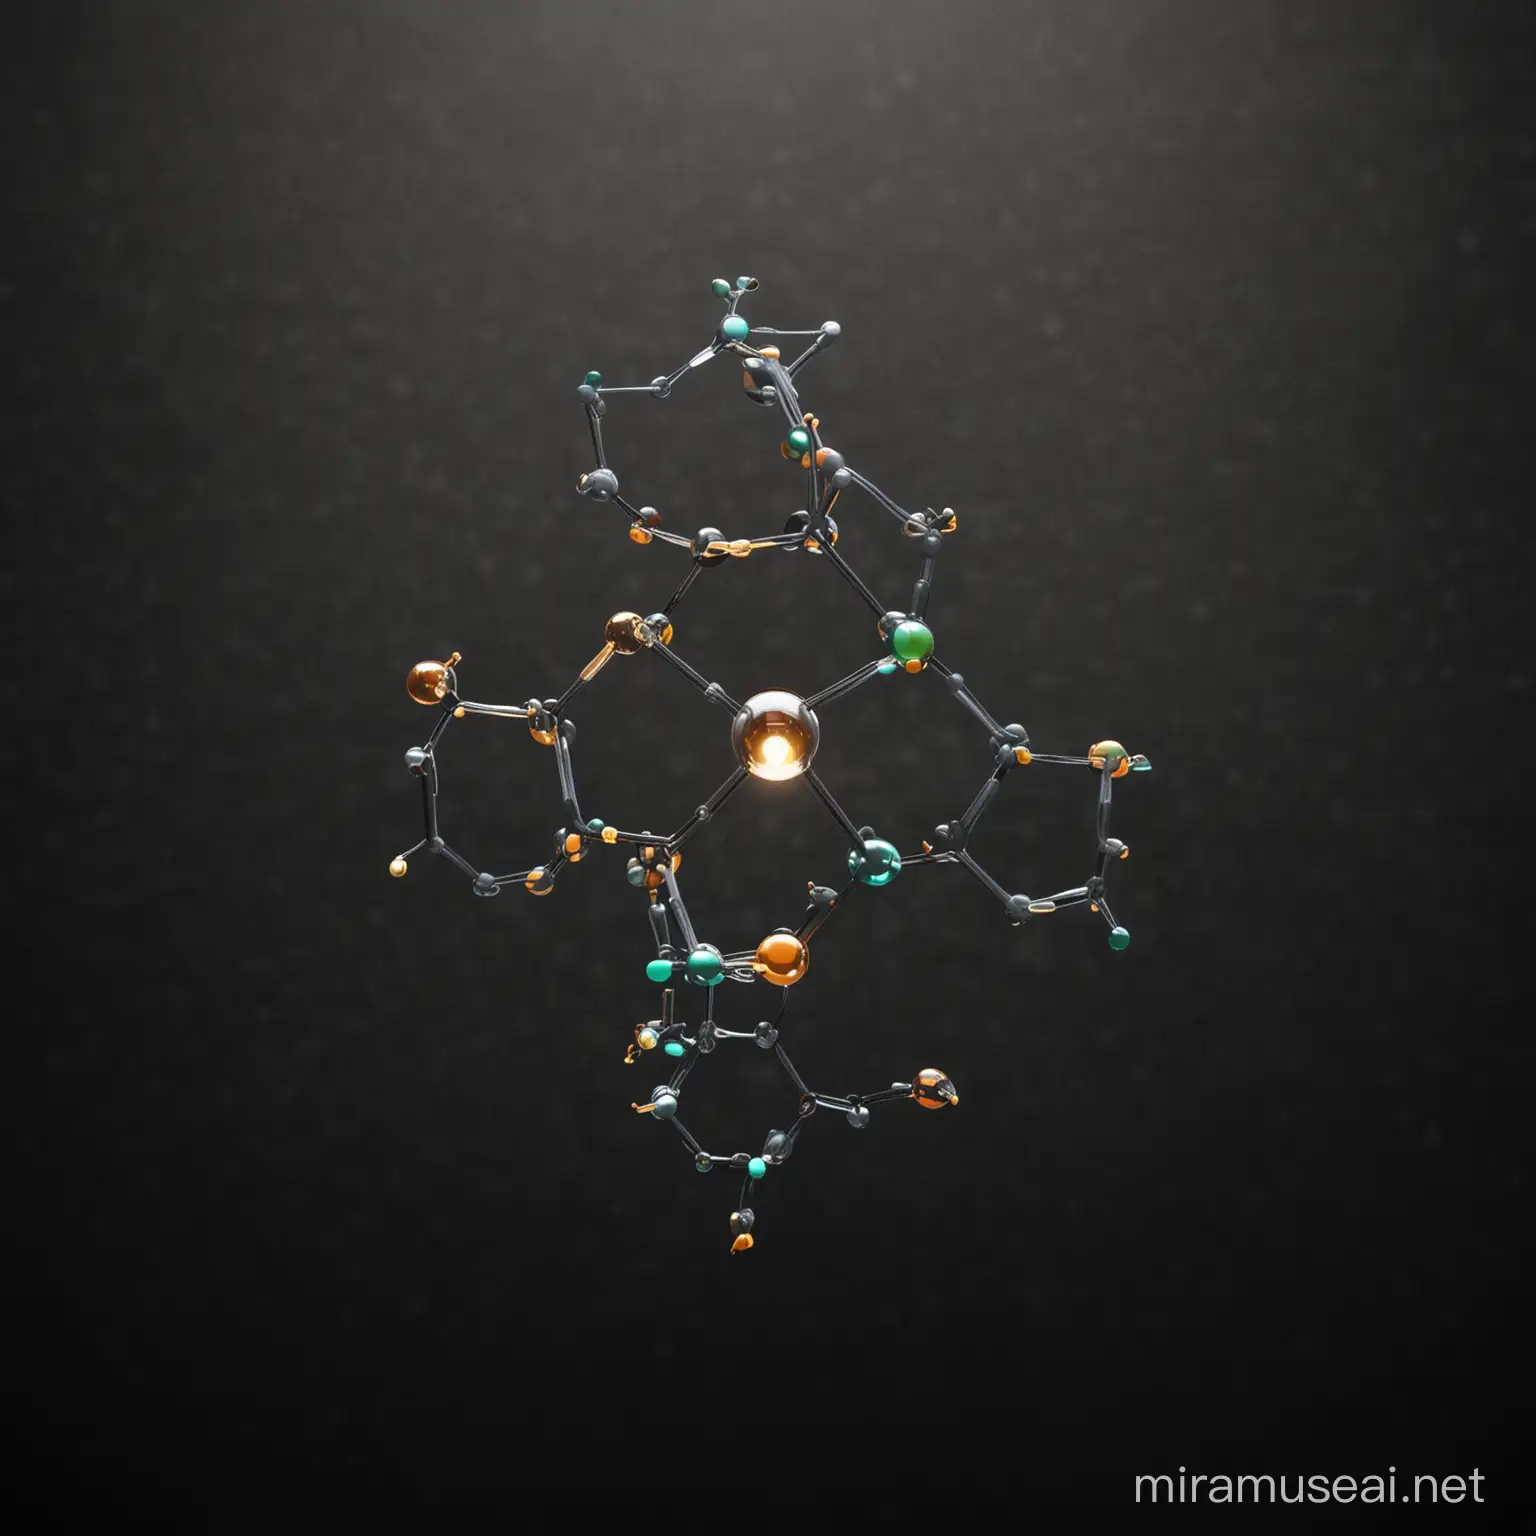 one light molecule in the middle of black background